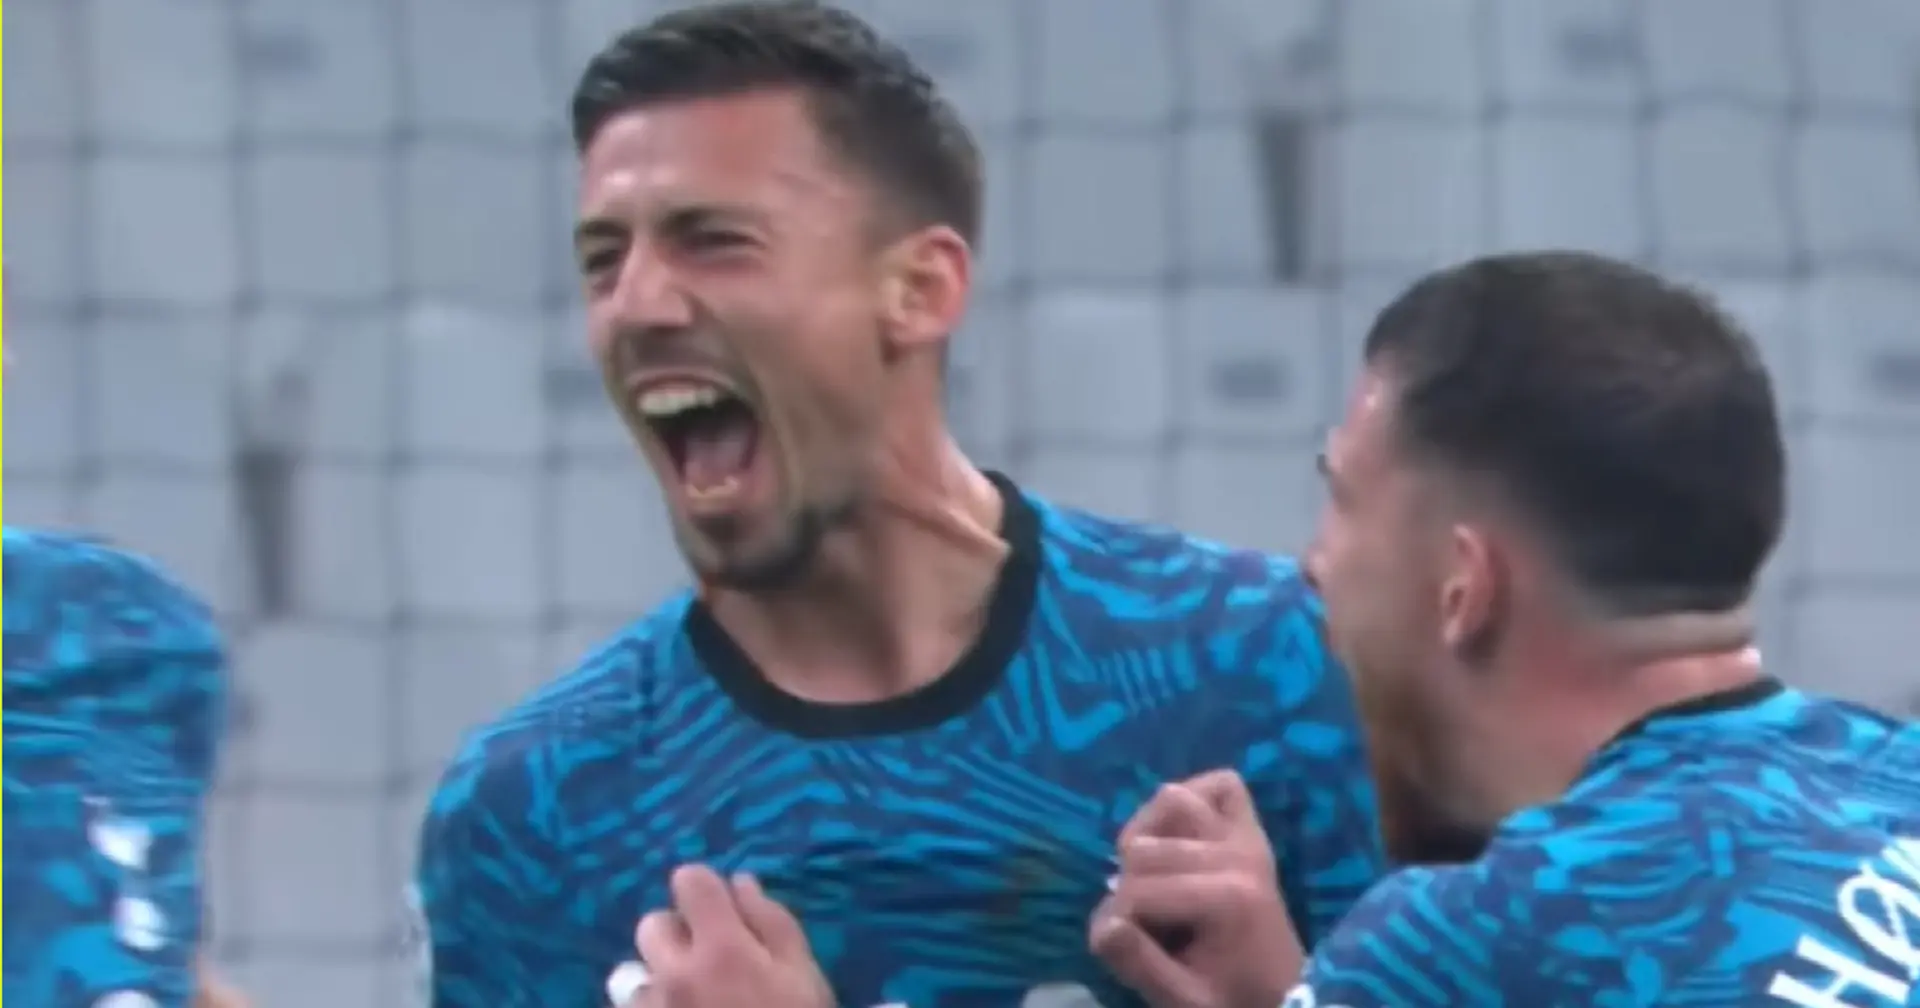 Lenglet shines at Tottenham, scores first goal – would you take him back at Barca?